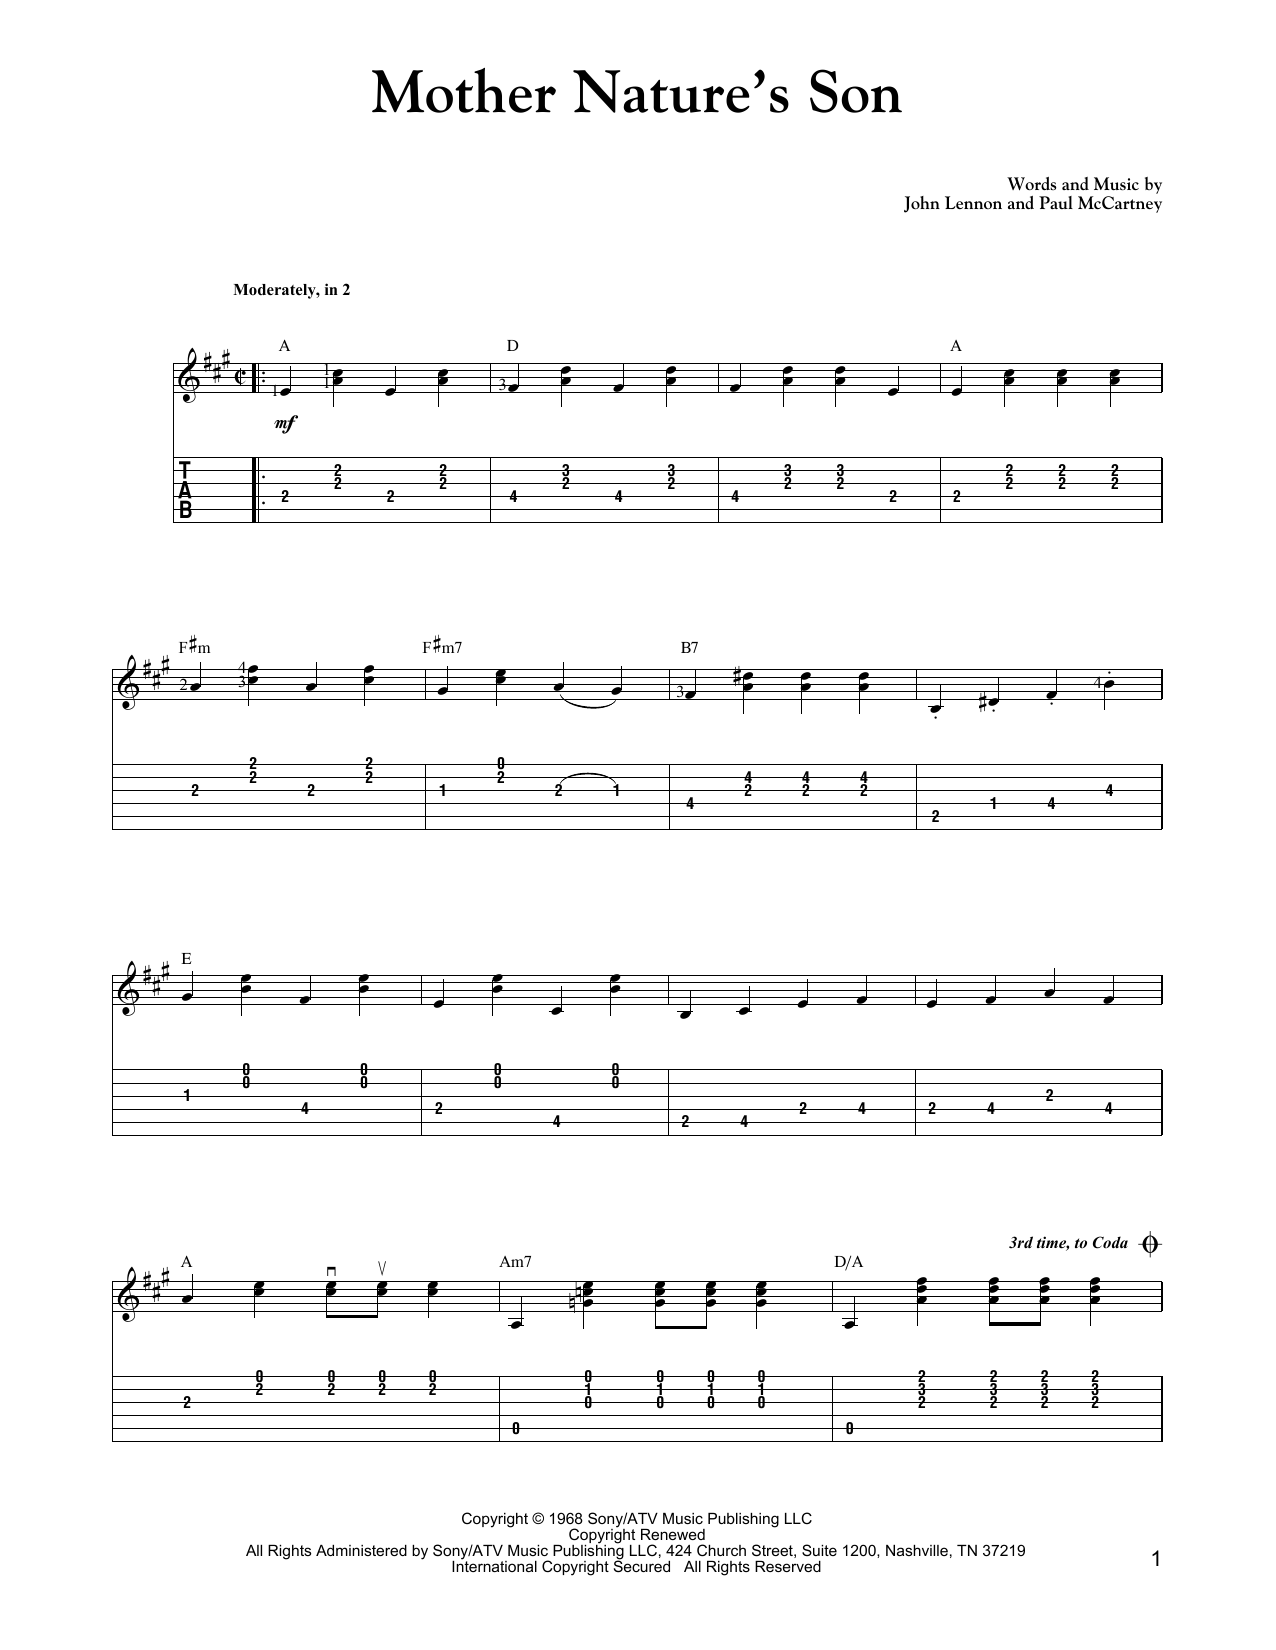 Download Carter Style Guitar Mother Nature's Son Sheet Music